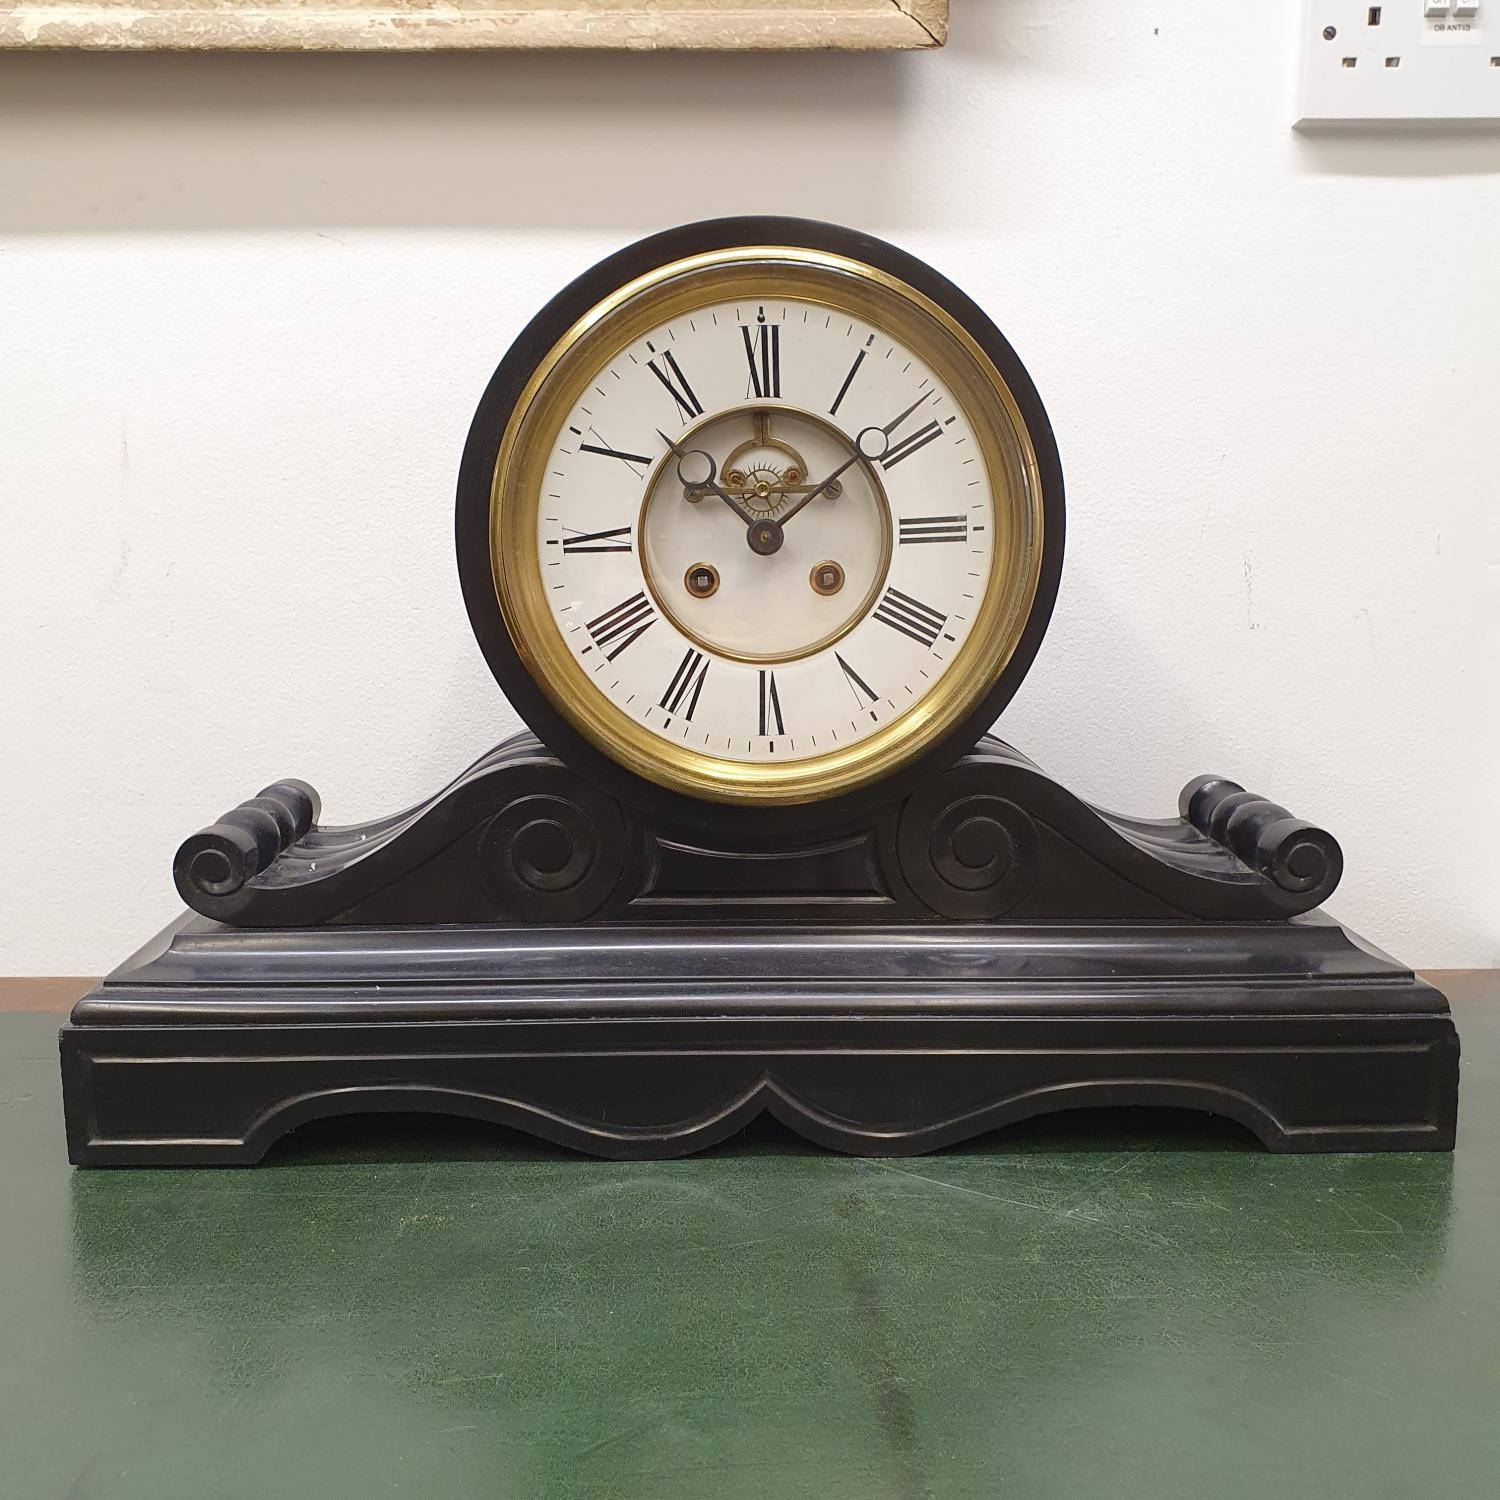 A mantel clock, with Roman numerals and a visible anchor escapement, in a polished slate case, 57 cm